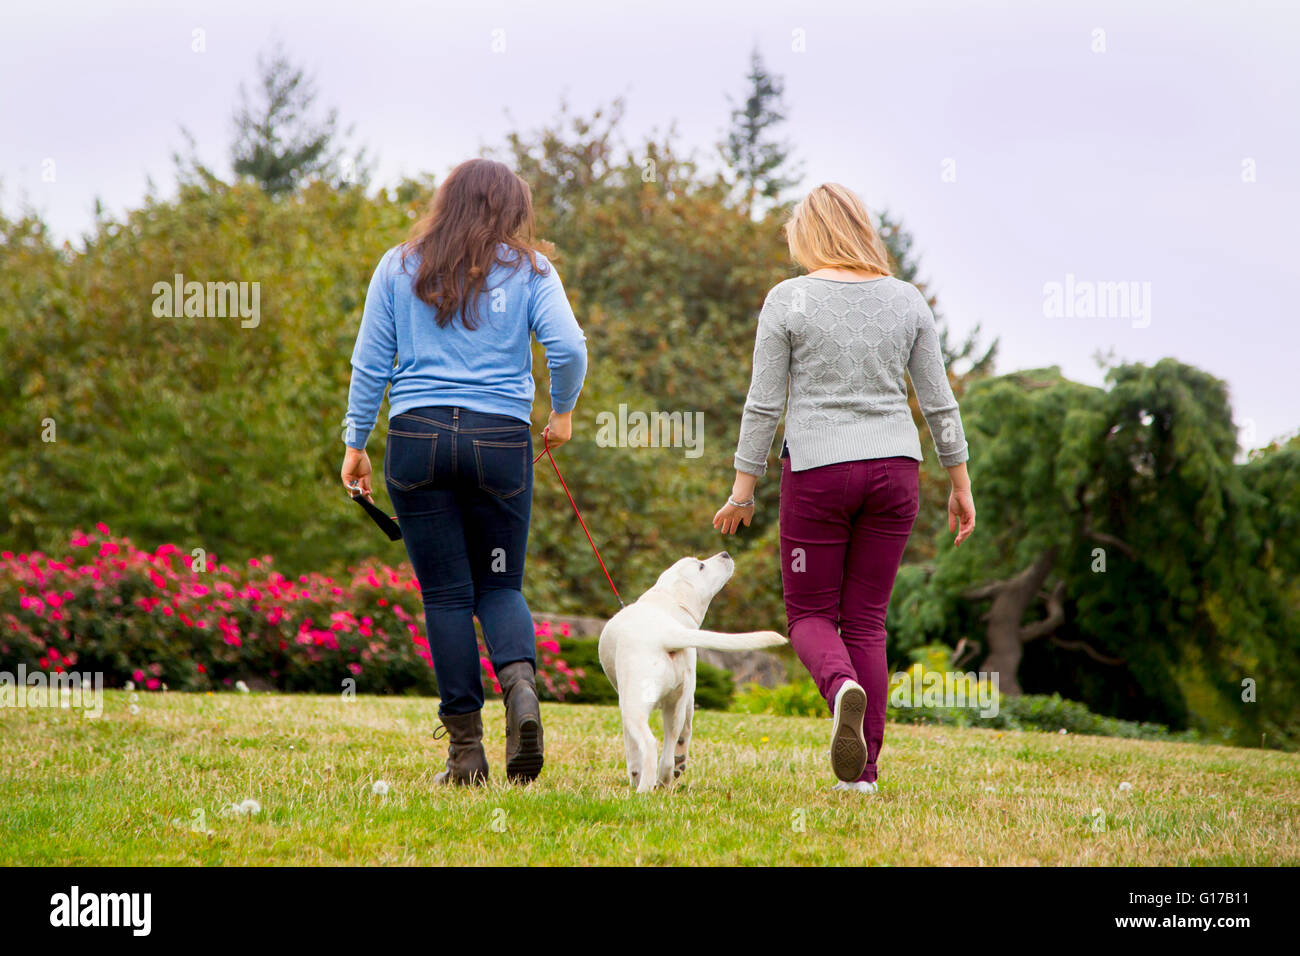 Two young women walking dog in park, rear view Stock Photo